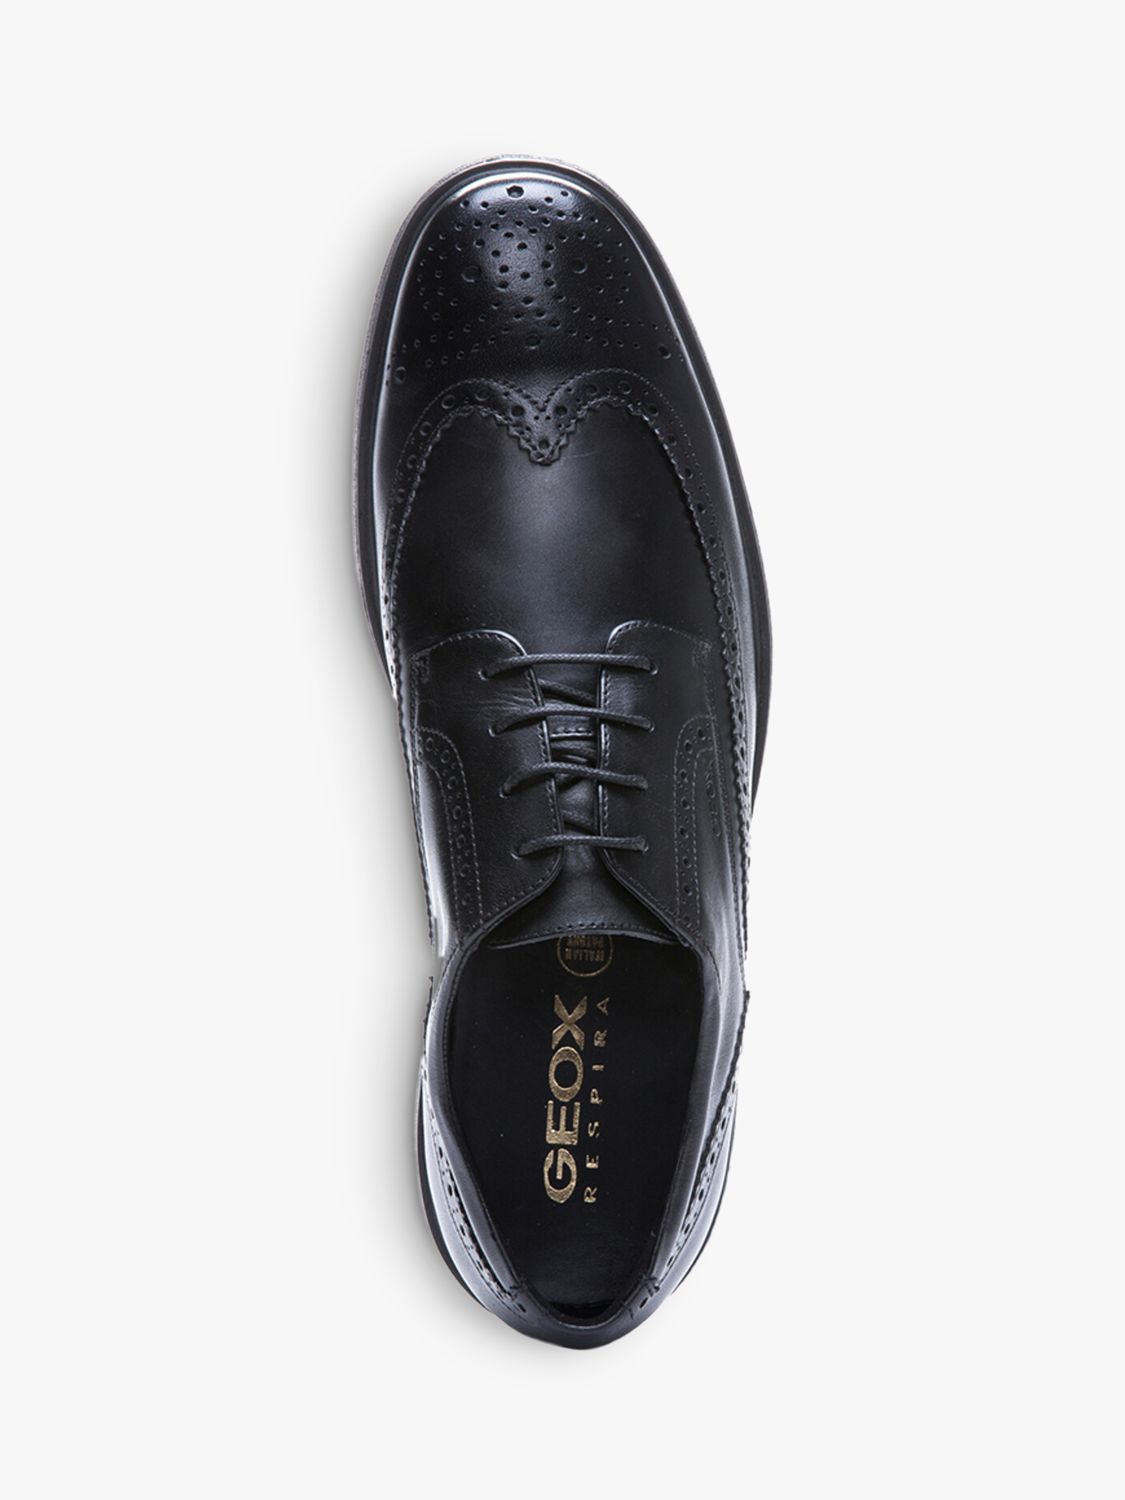 Geox Derby Shoes, Black at John Lewis Partners